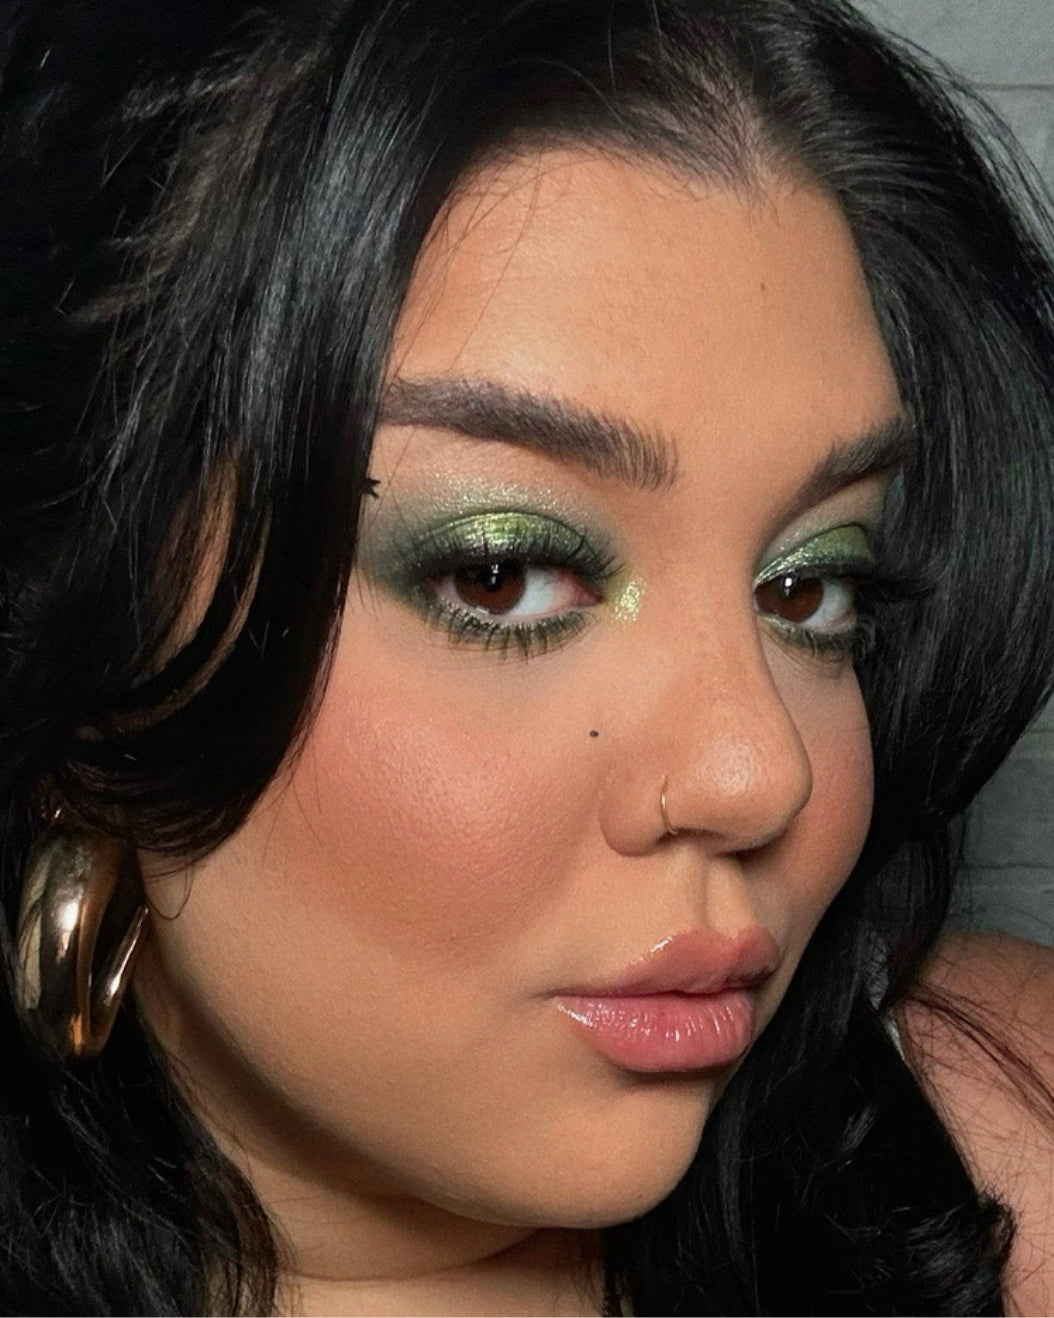 Makeup artist wears a matcha latte-inspired makeup look with shimmery green eyeshadow and dusty rose nude lips